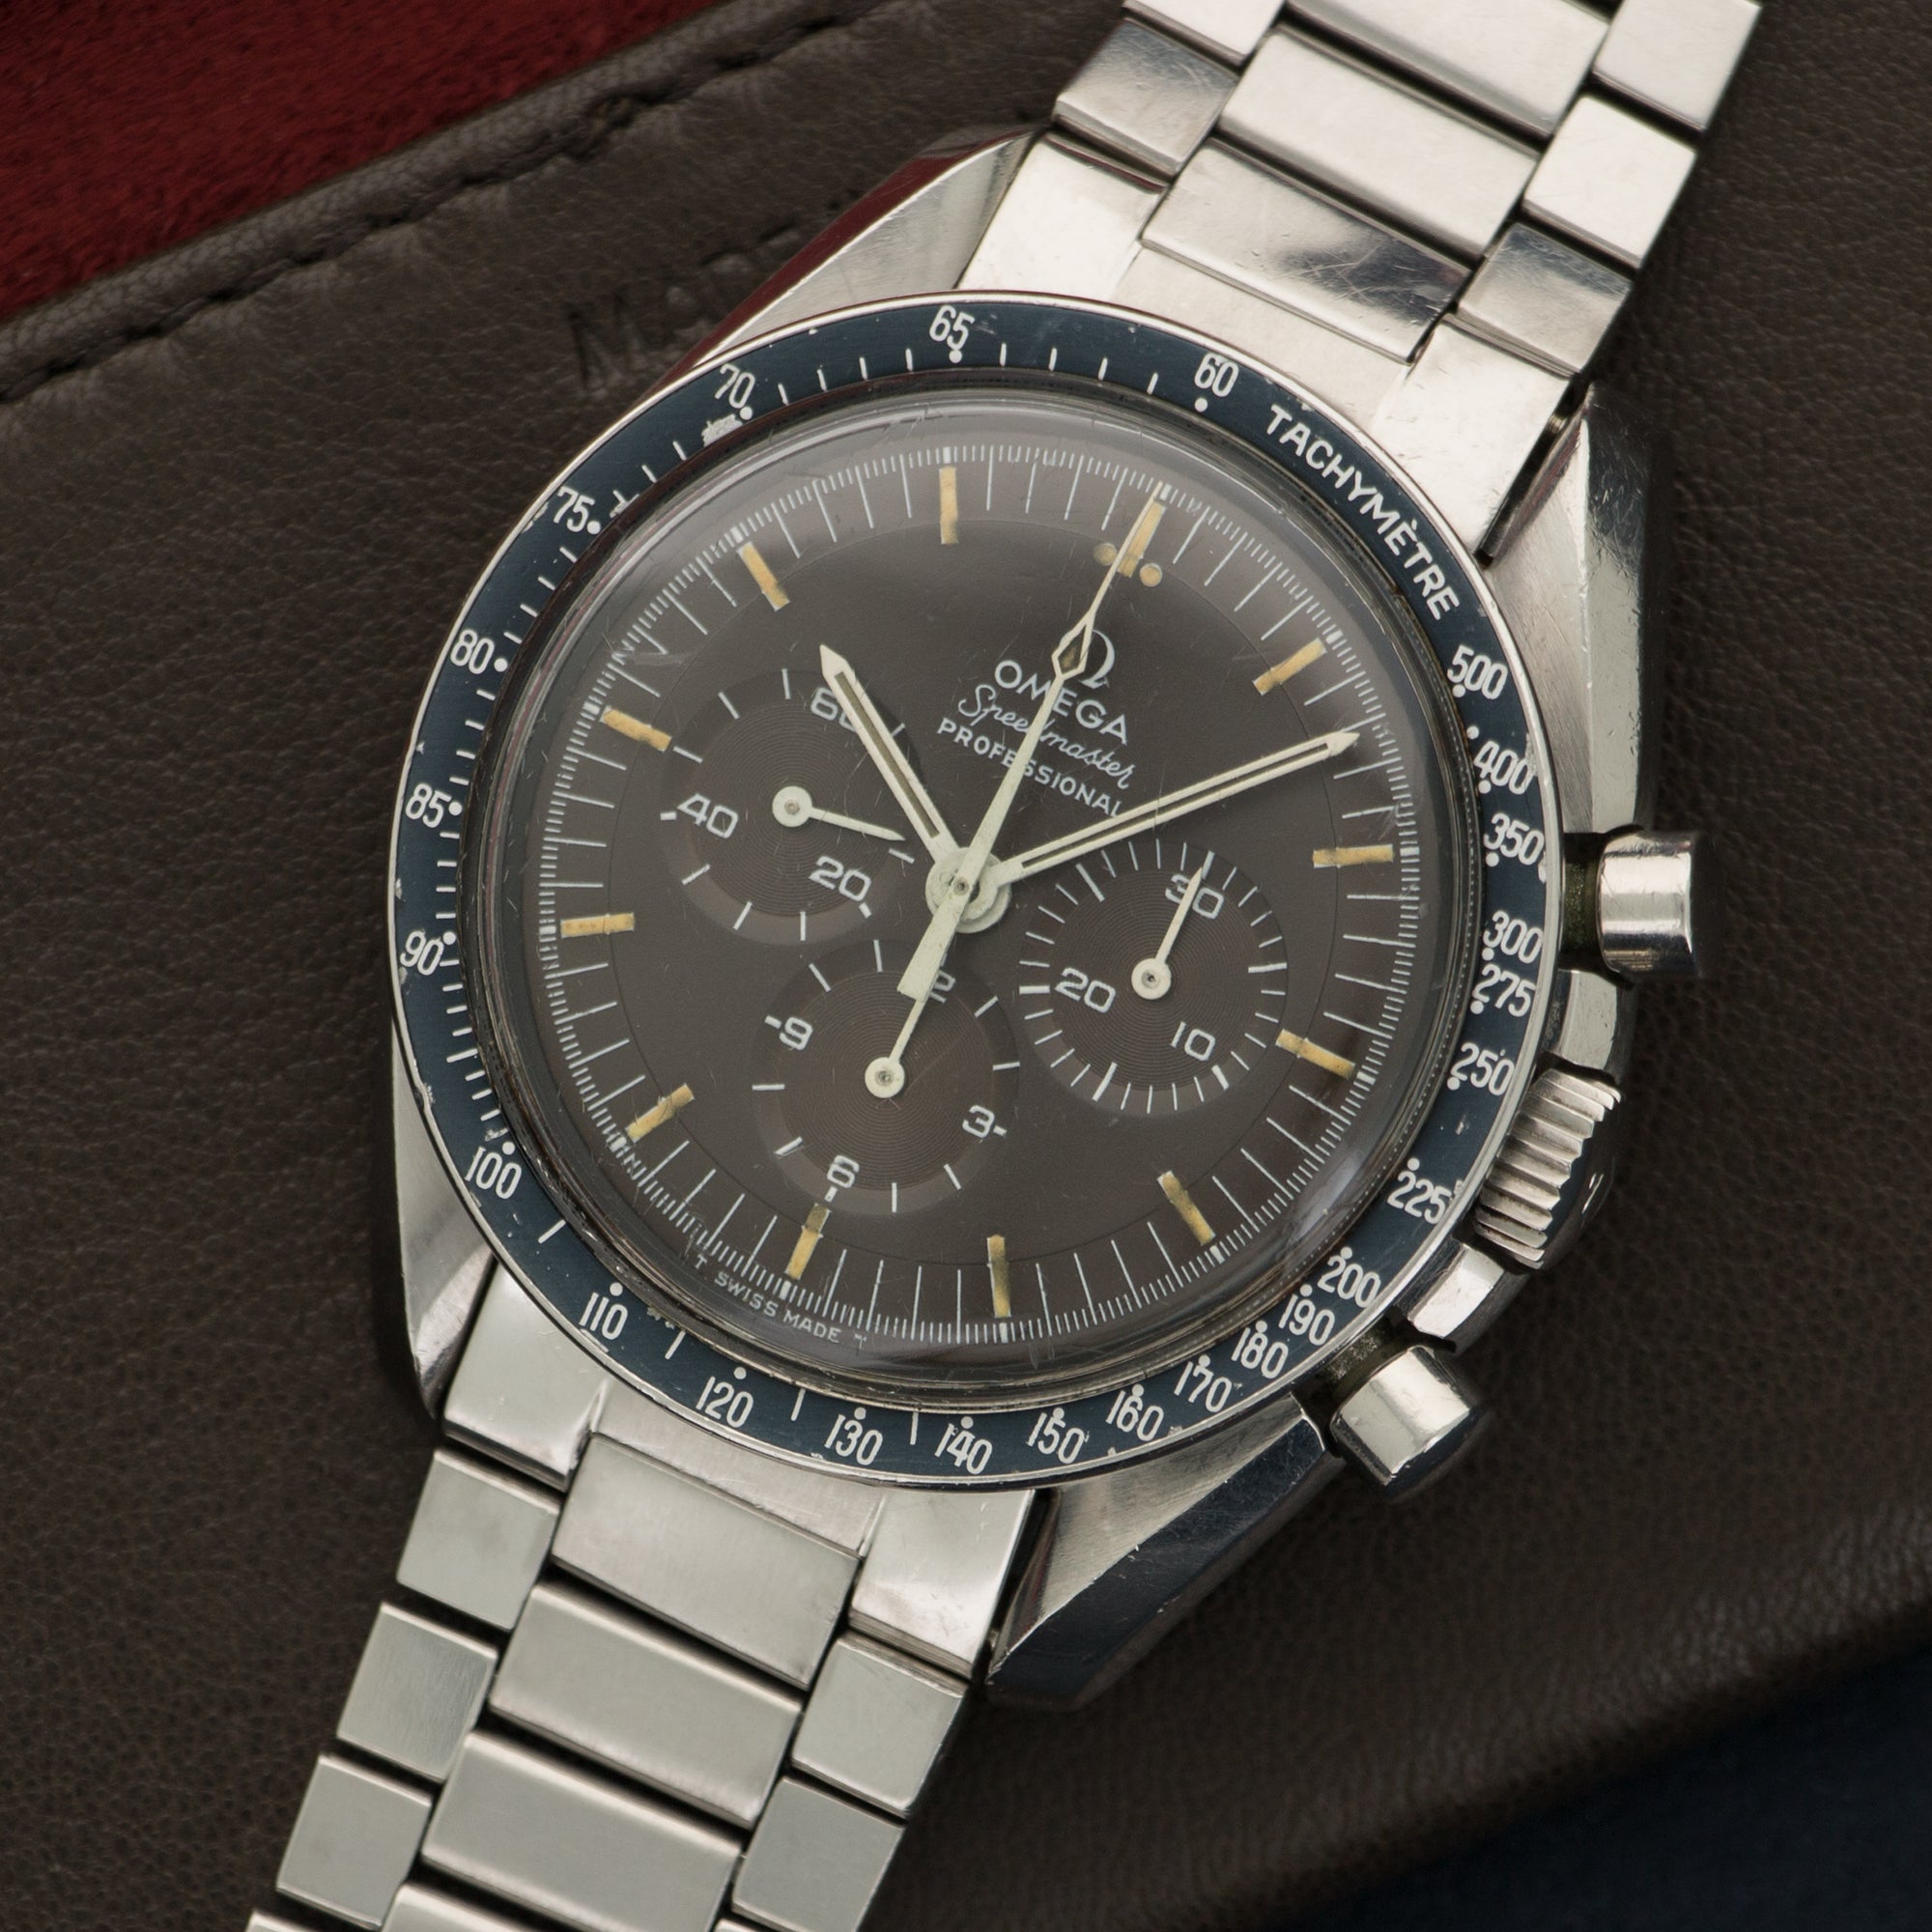 Omega - Omega Speedmaster Professional Tropical Brown Ref. 145.022 - The Keystone Watches